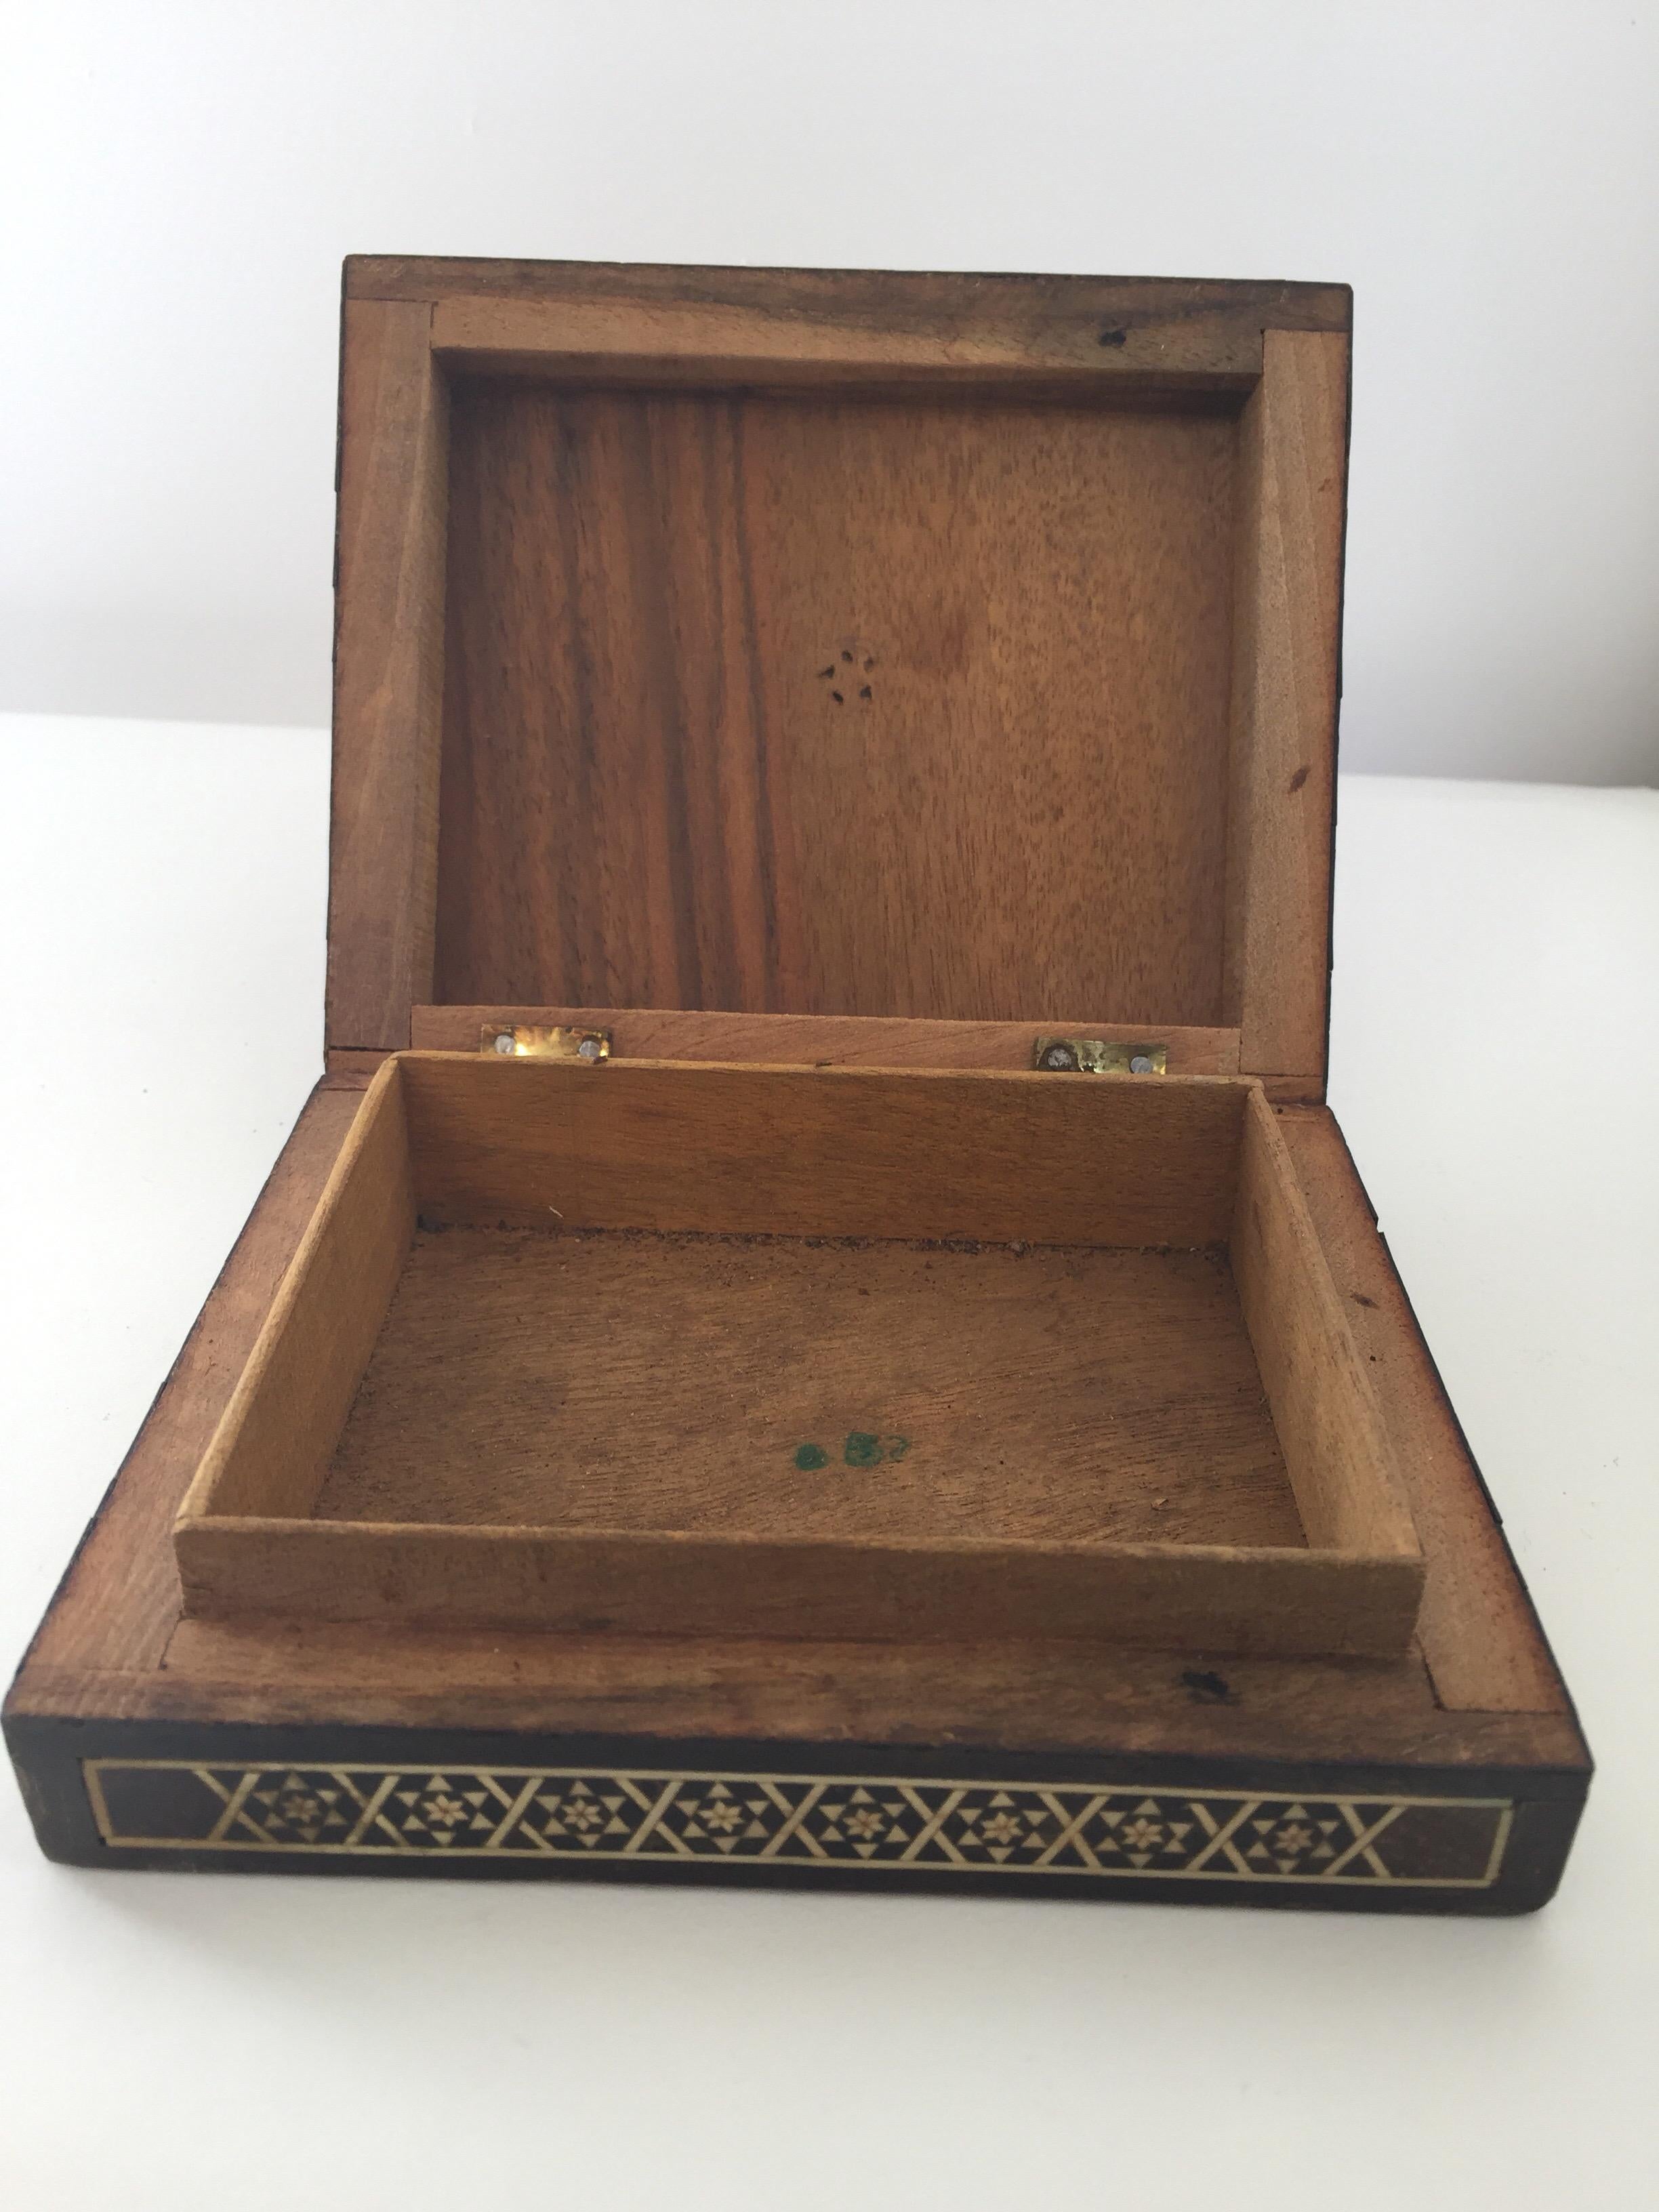 20th Century Syrian Inlaid Marquetry Mosaic Wooden Box